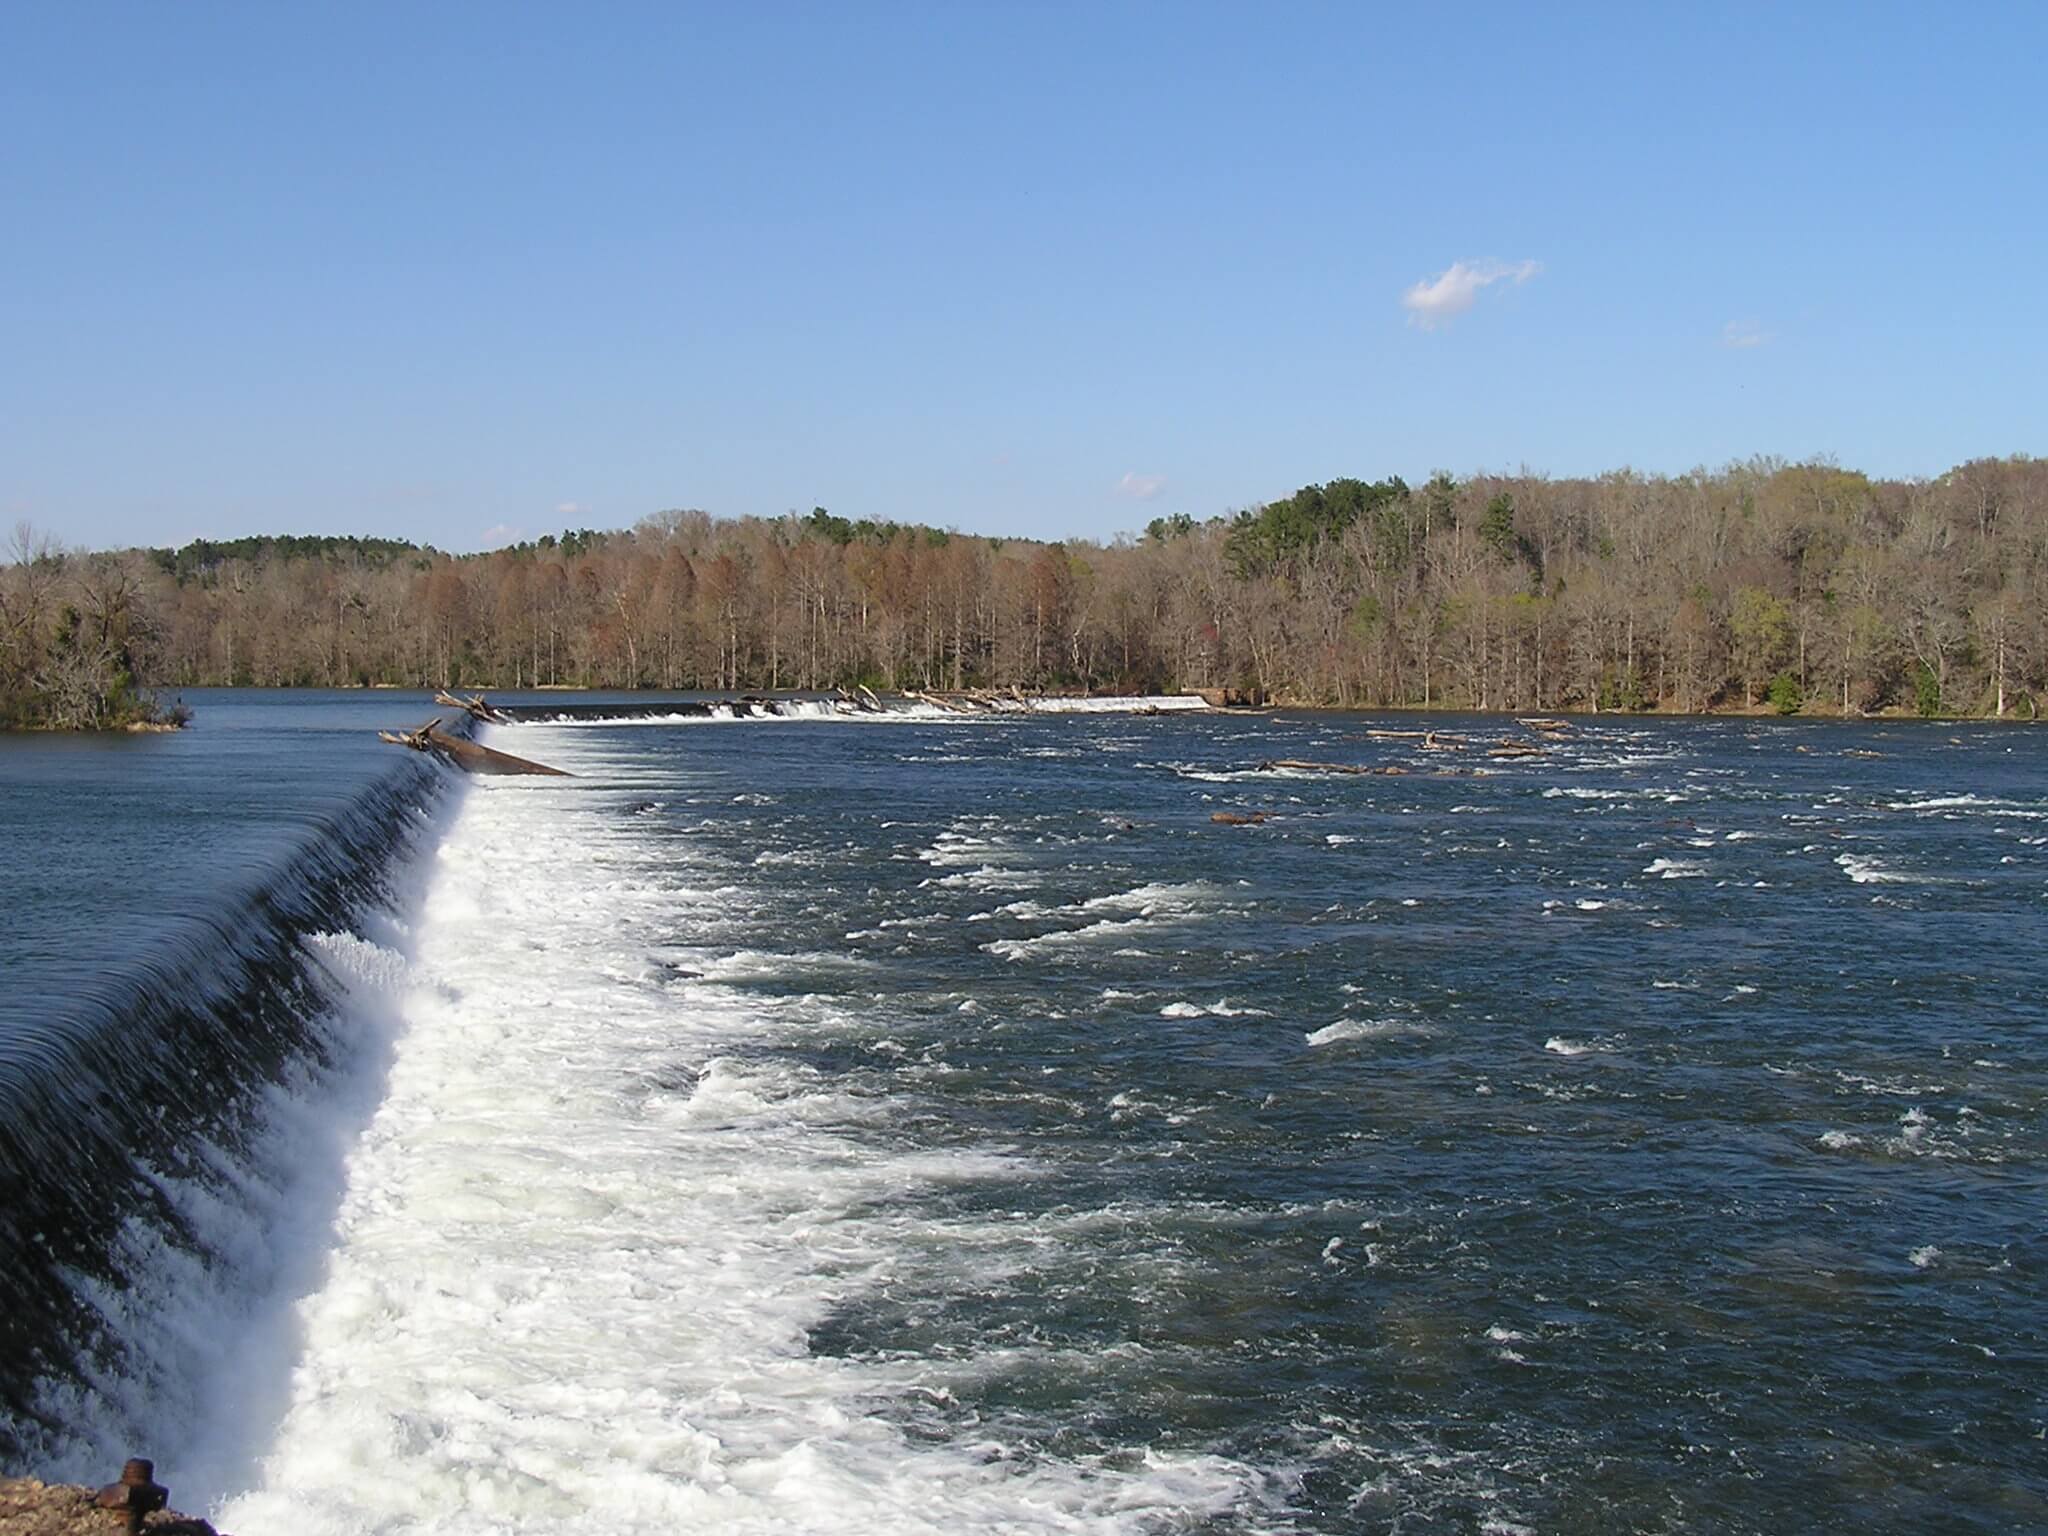 The Savannah River below the Augusta Canal diversion is characterized by numerous rock structures called shoals.  Shoals river reaches provide important fish spawning and rearing habitat in the Savannah River.